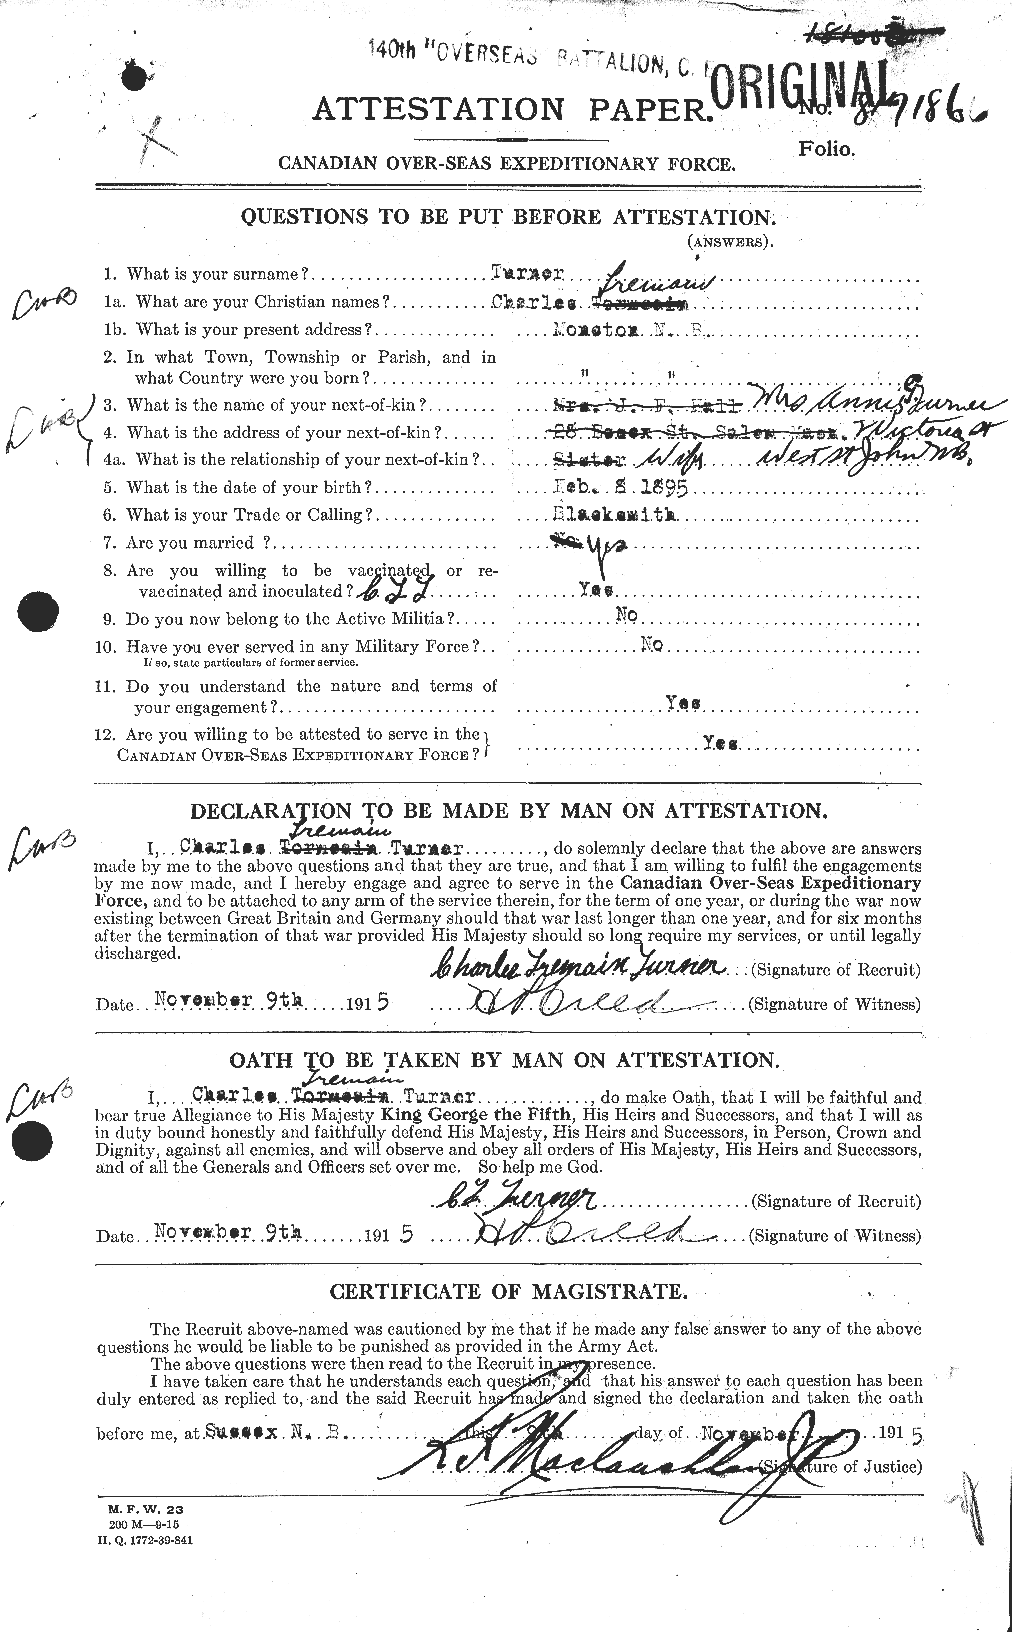 Personnel Records of the First World War - CEF 646384a